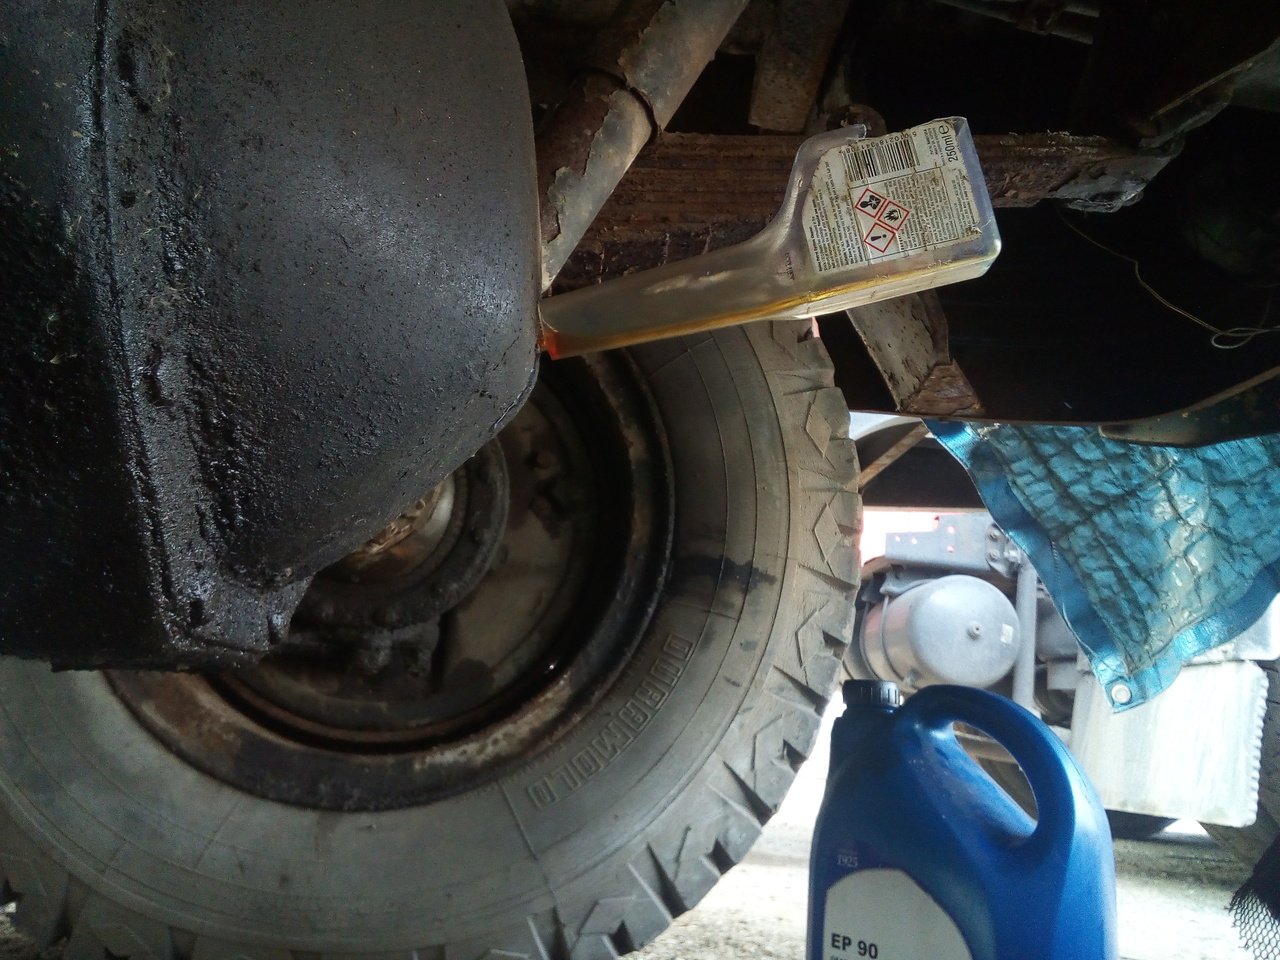 The view under the front axle of the truck, with an oddly-shaped
plastic bottle being used as a funnel to put gear oil into the front
differential.